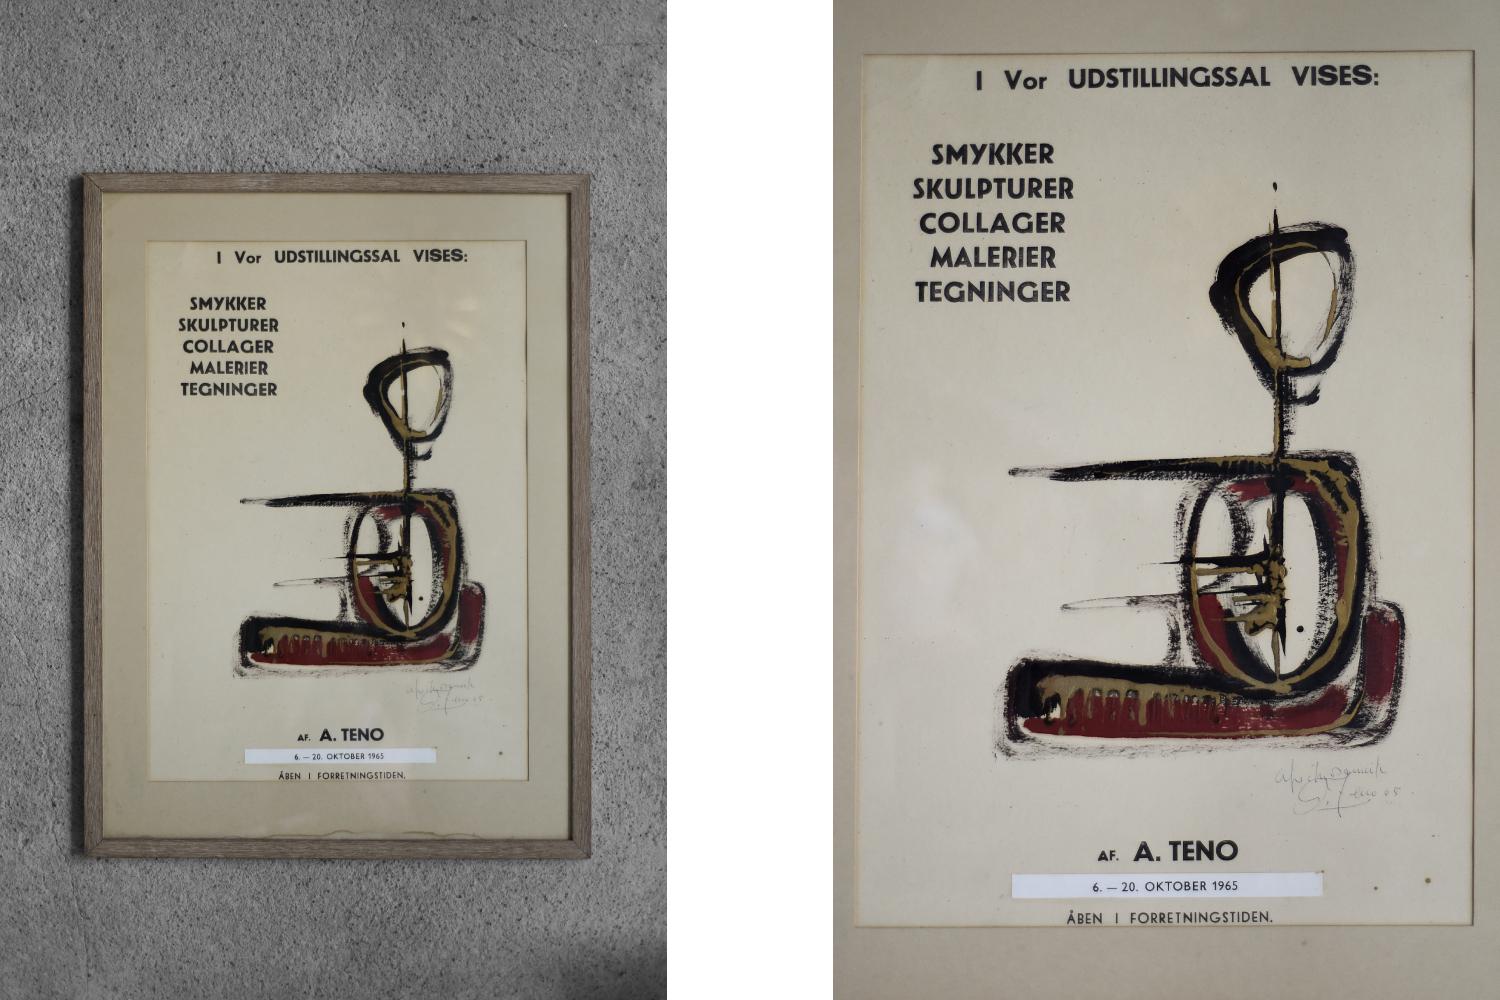 Original poster from the exhibition of Aurelio Teno's work, from October 6 to 20, 1965 in Copenhagen. The exhibition included sculptures, jewelry, collages, drawings and paintings by the author. The poster has the author's signature and